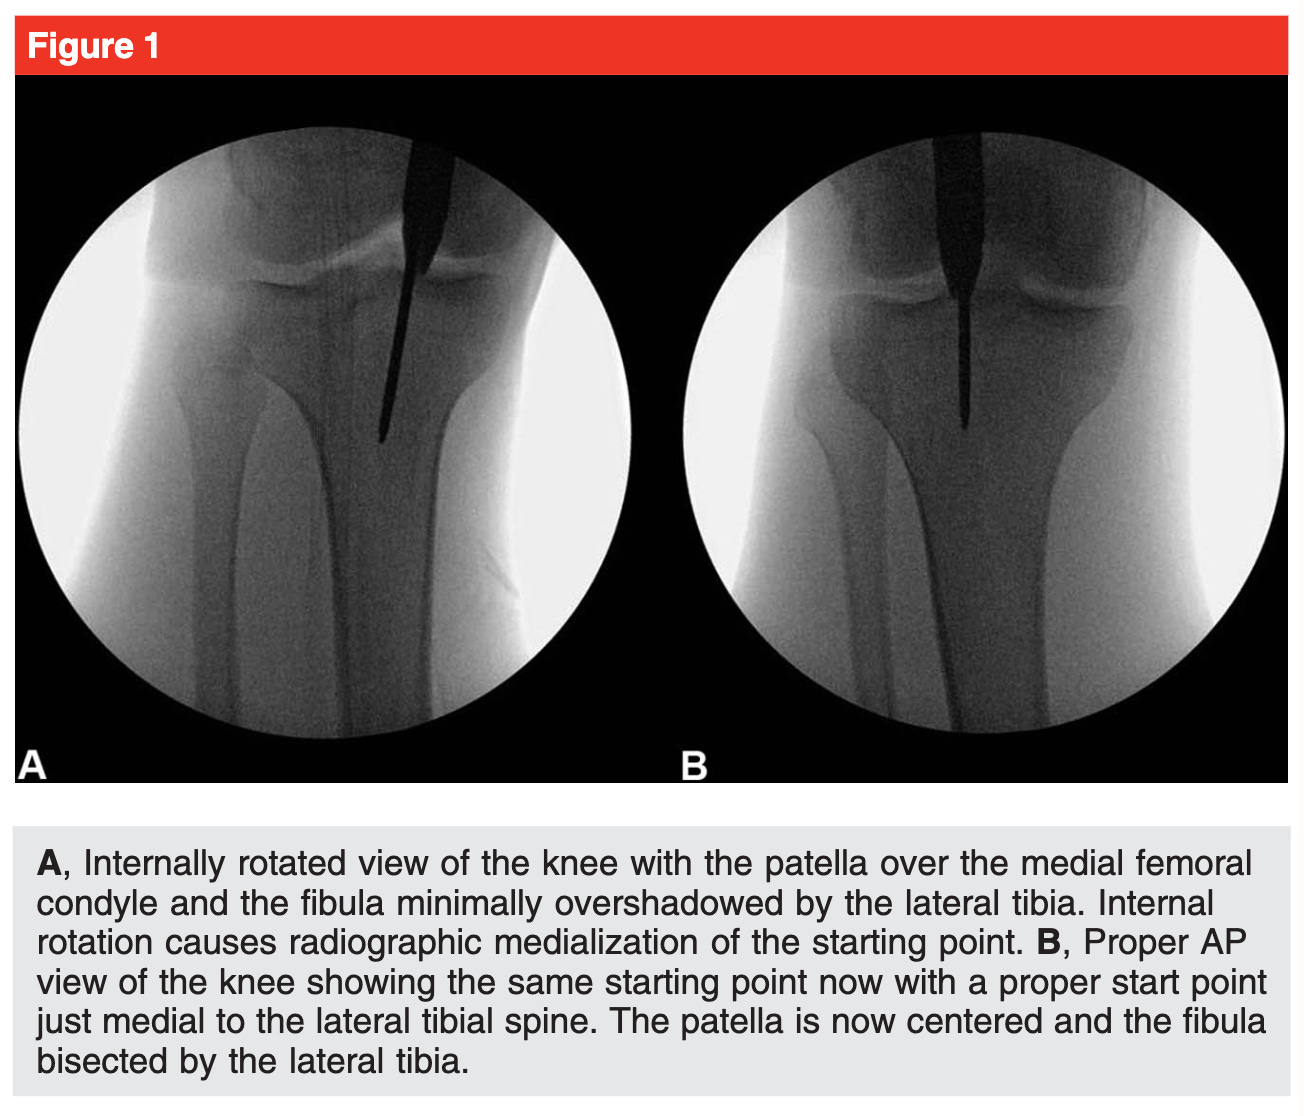 Tibial Shaft Fractures: Intramedullary Nailing | Musculoskeletal Key